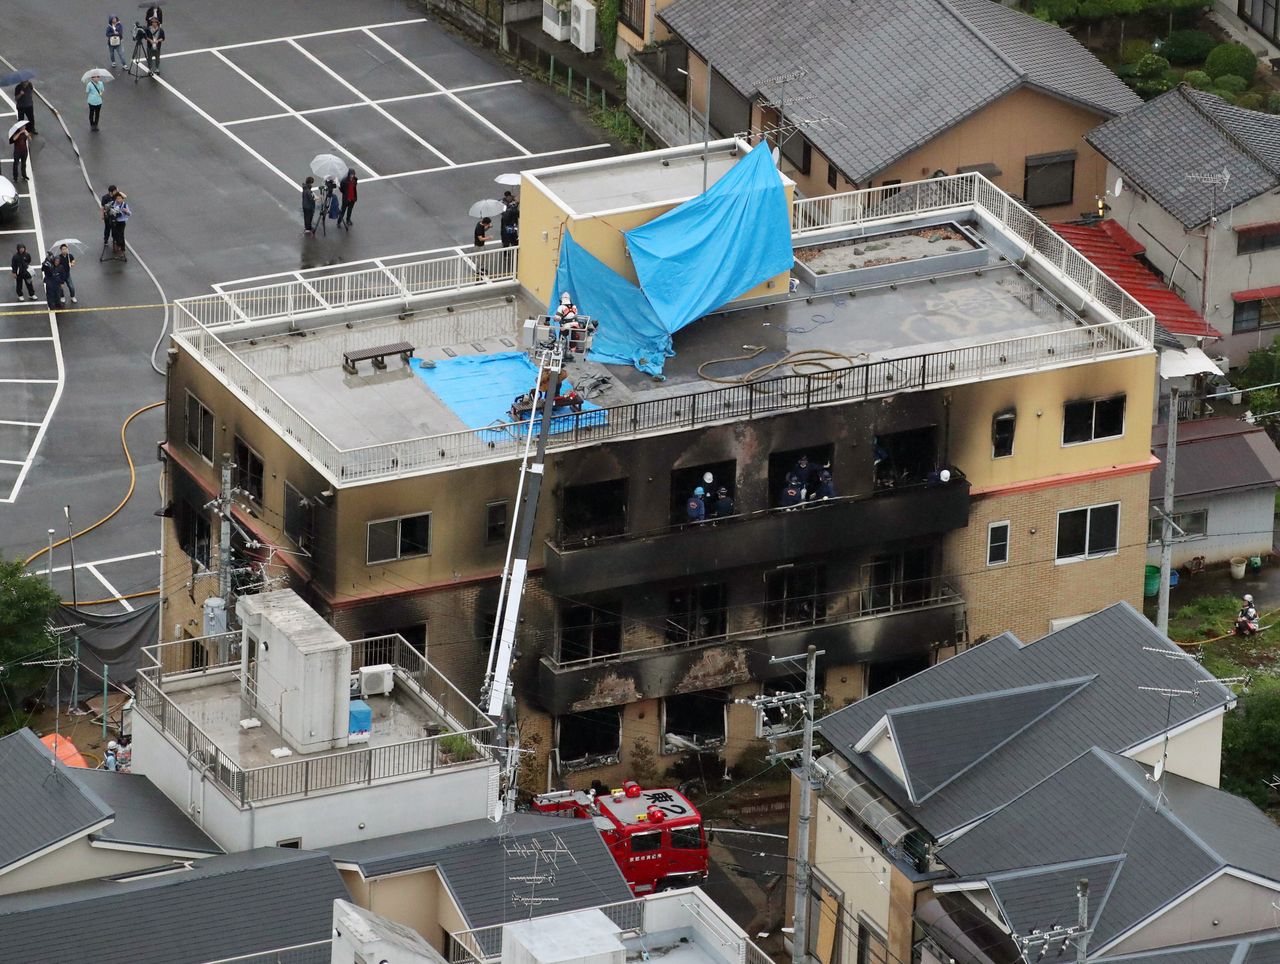 Death sentence for man who arson attacked an anime studio in Kyoto, killing 36 people